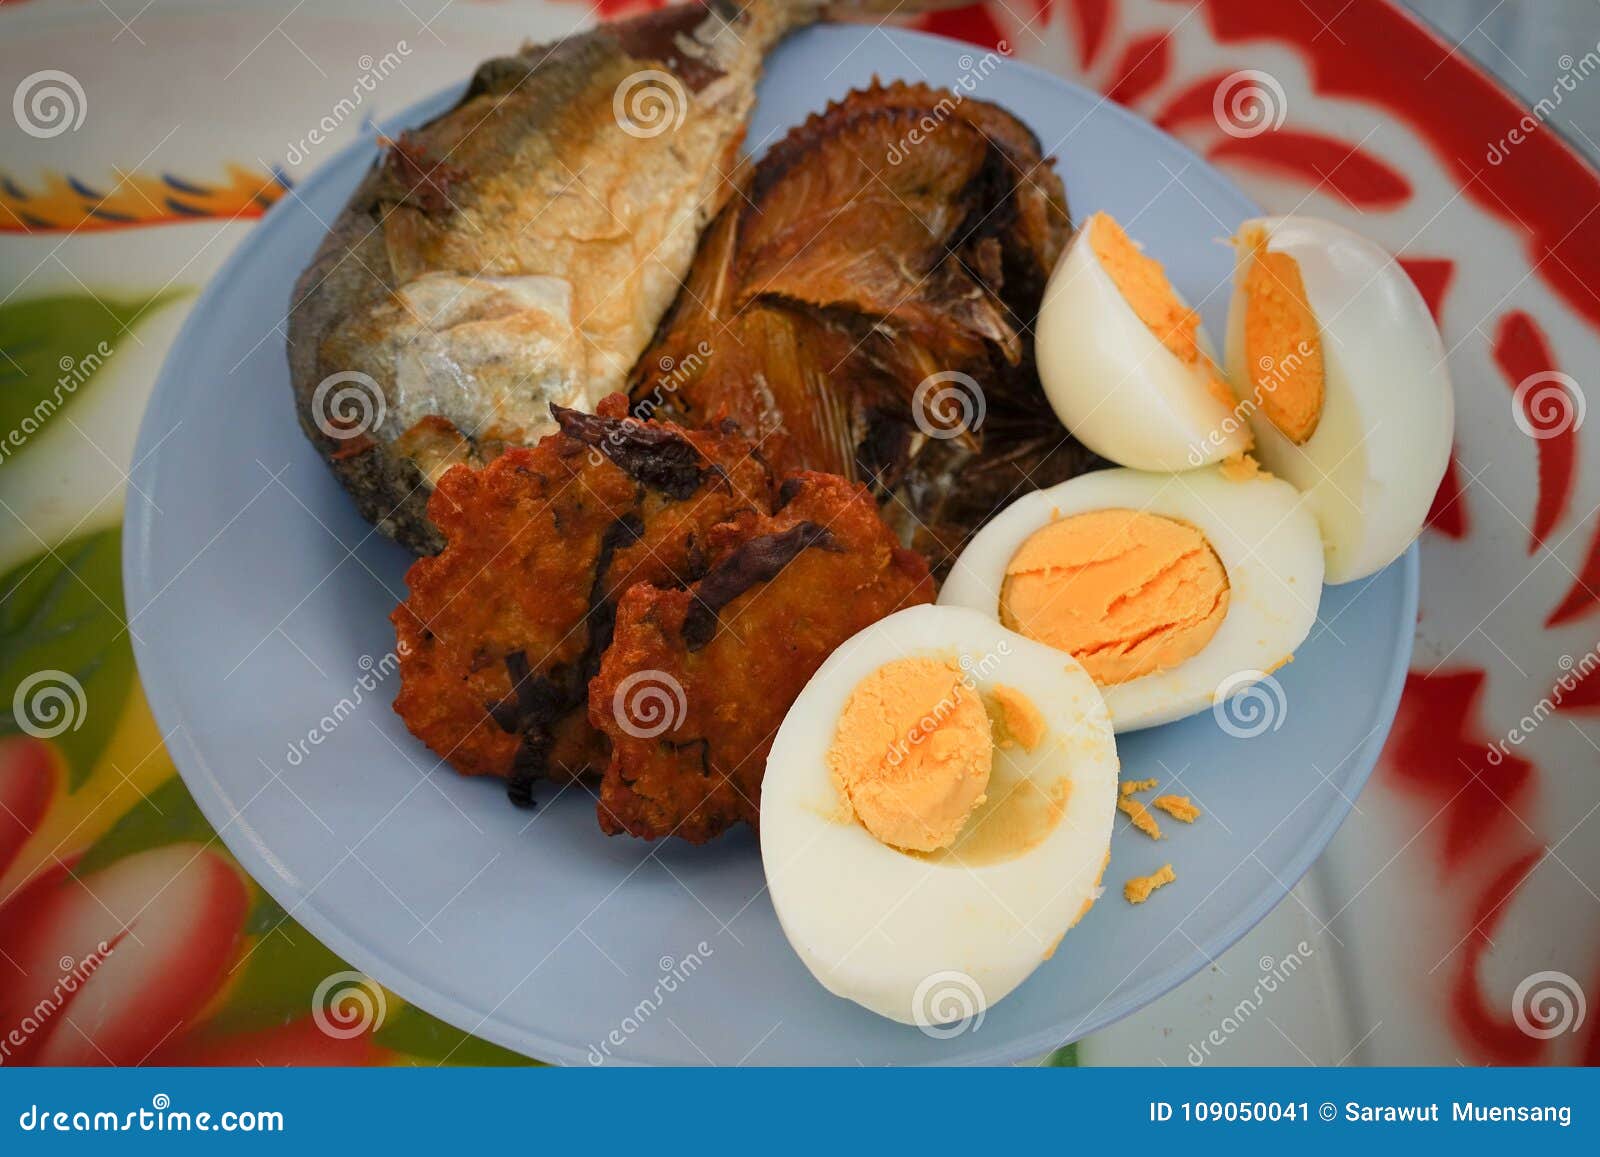 Fried Fish and Eggs on Plate. Stock Image - Image of cereal, cucumber:  109050041